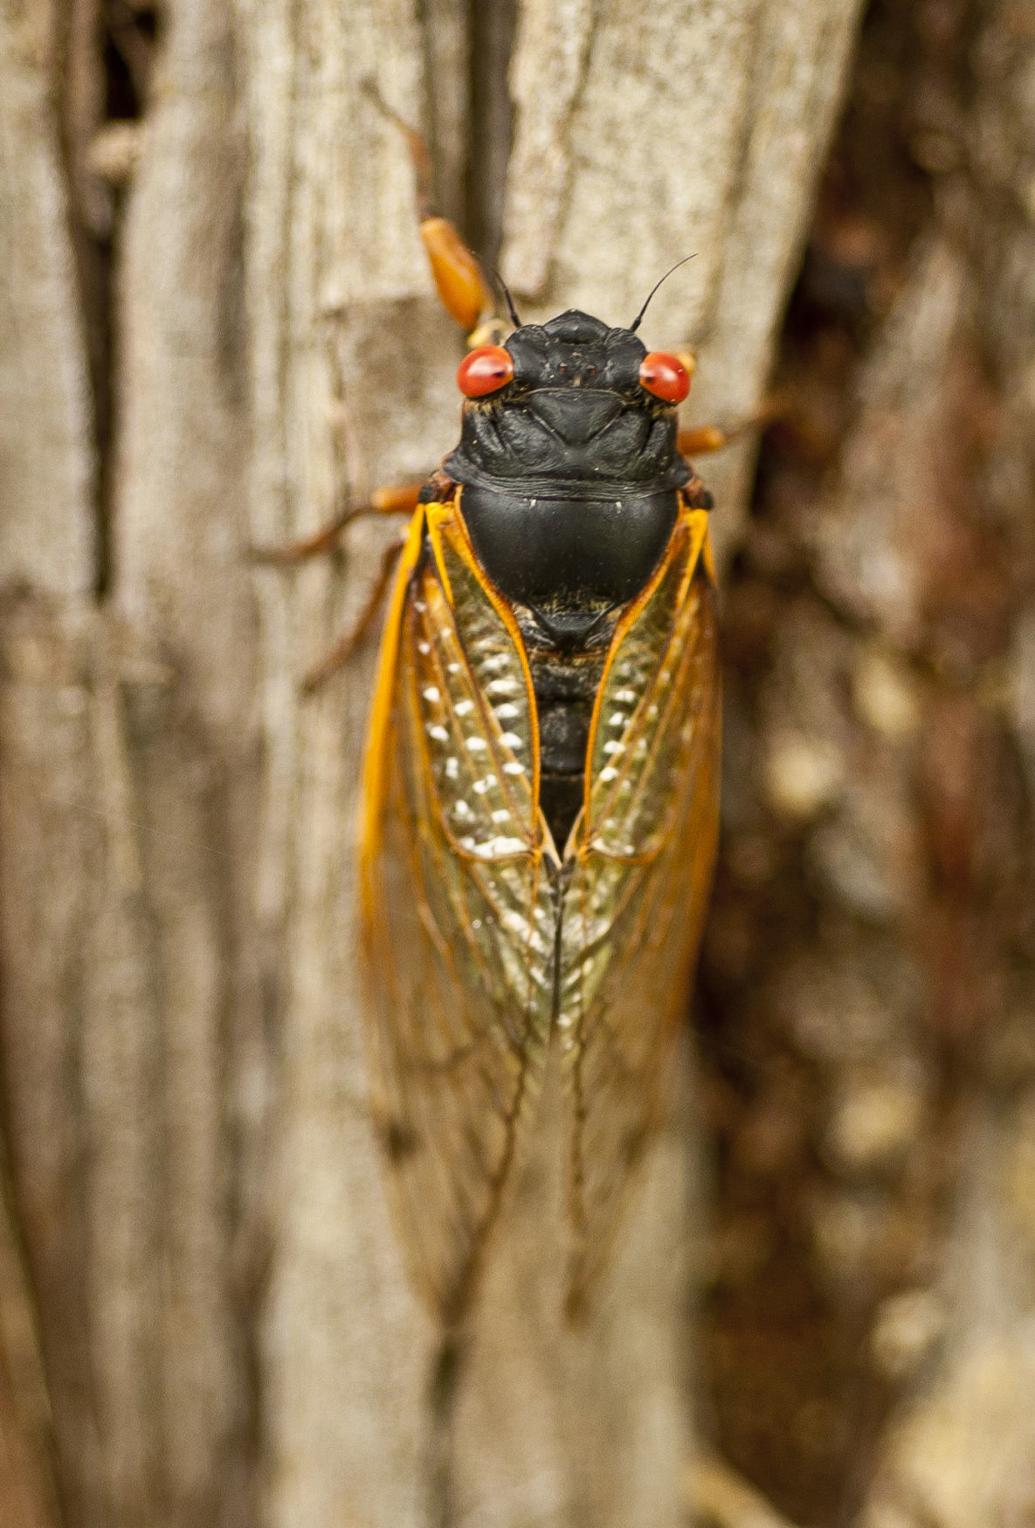 Cicada Central: We're in the midst of a raucous invasion